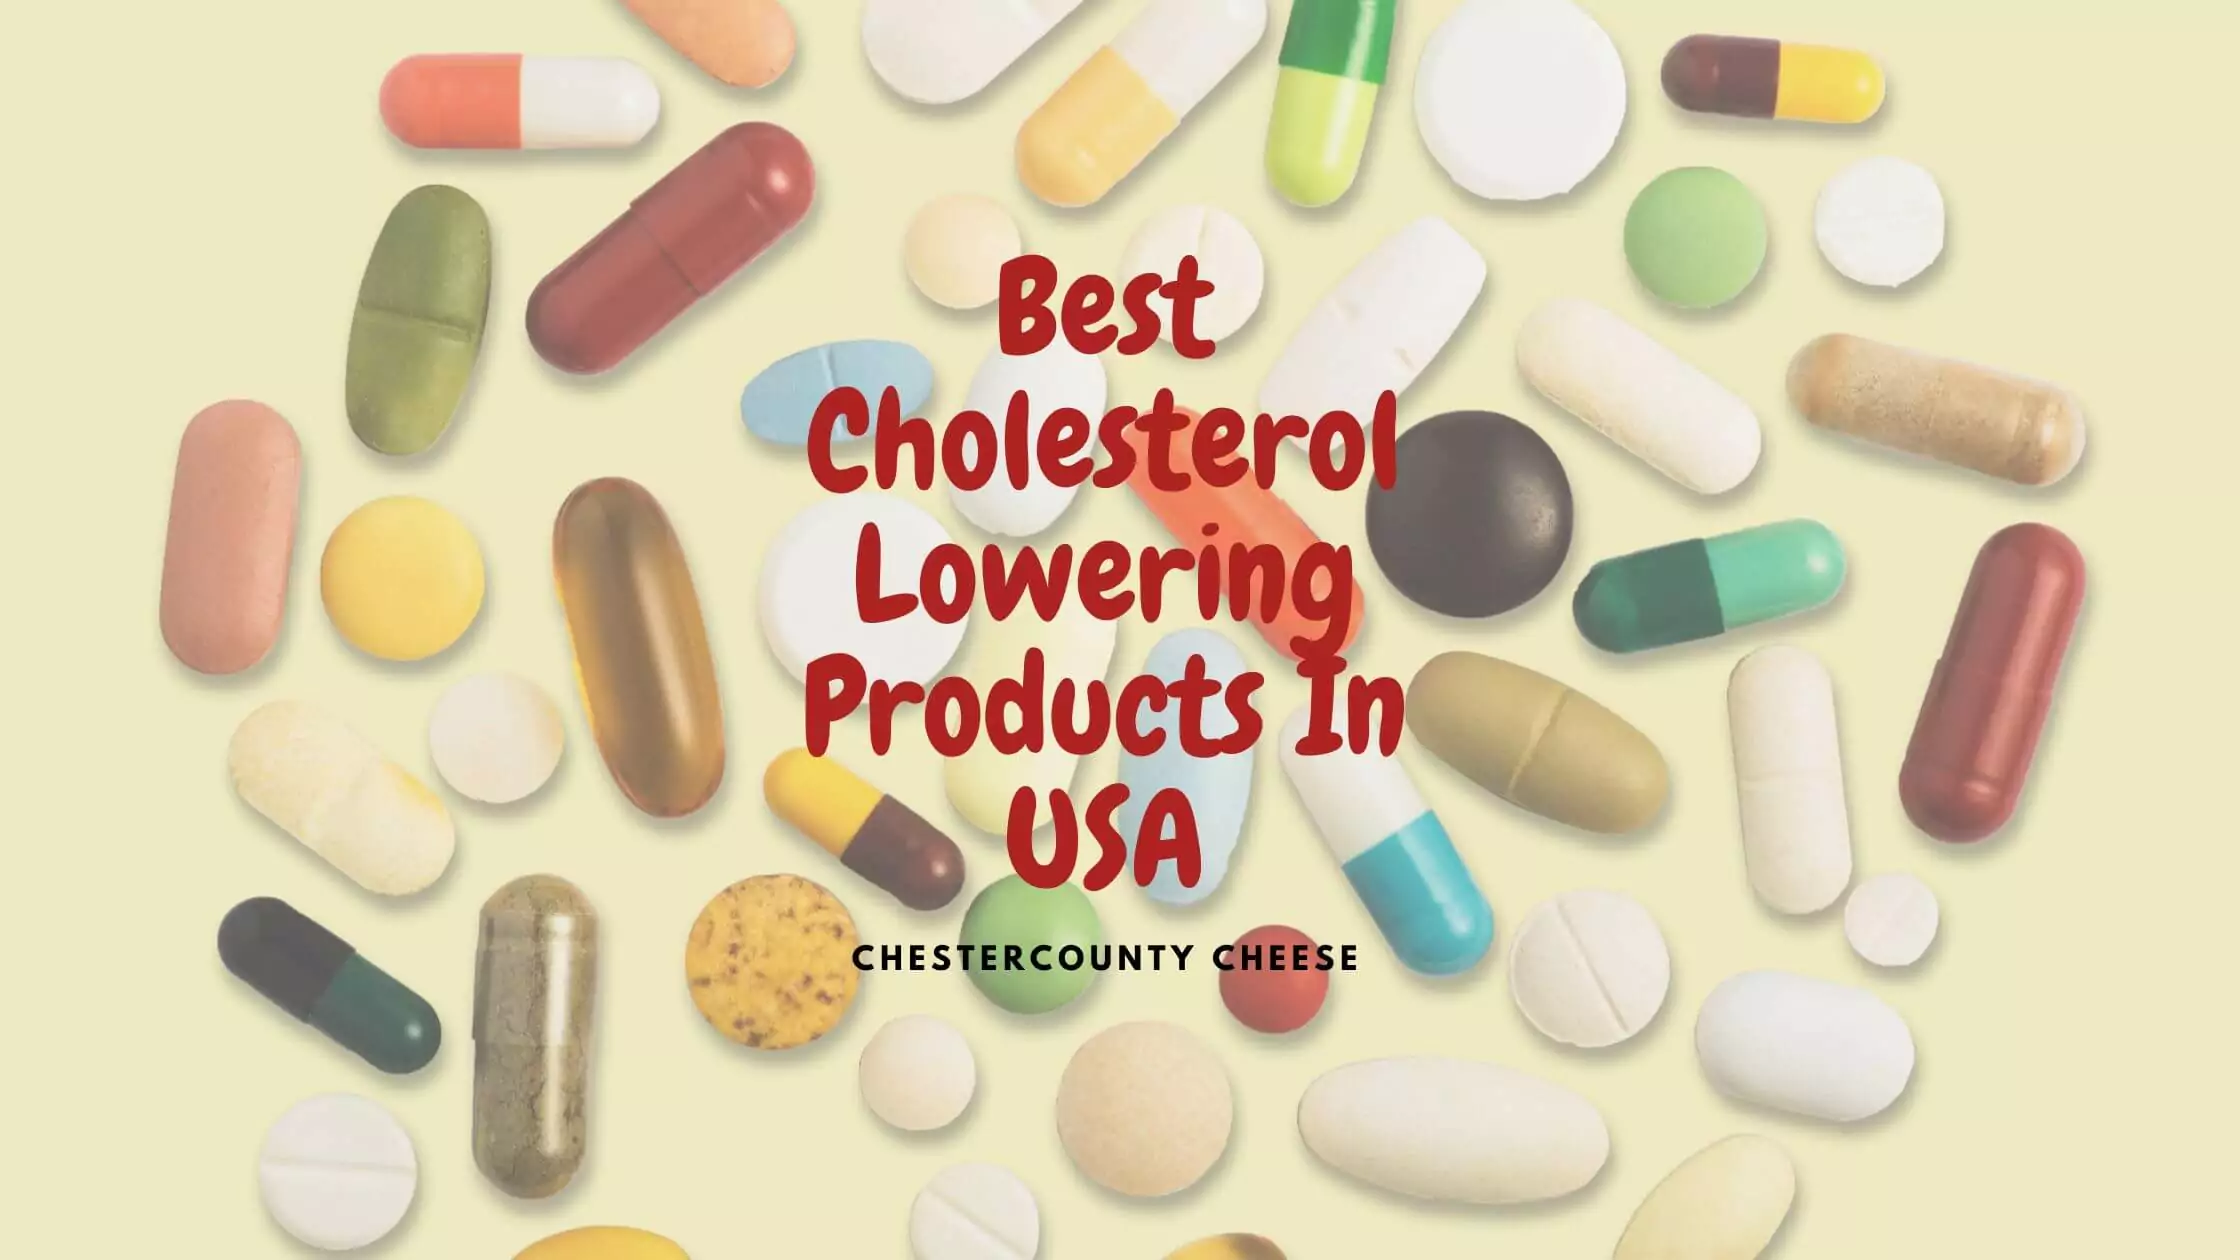 Best Cholesterol Lowering Products In USA